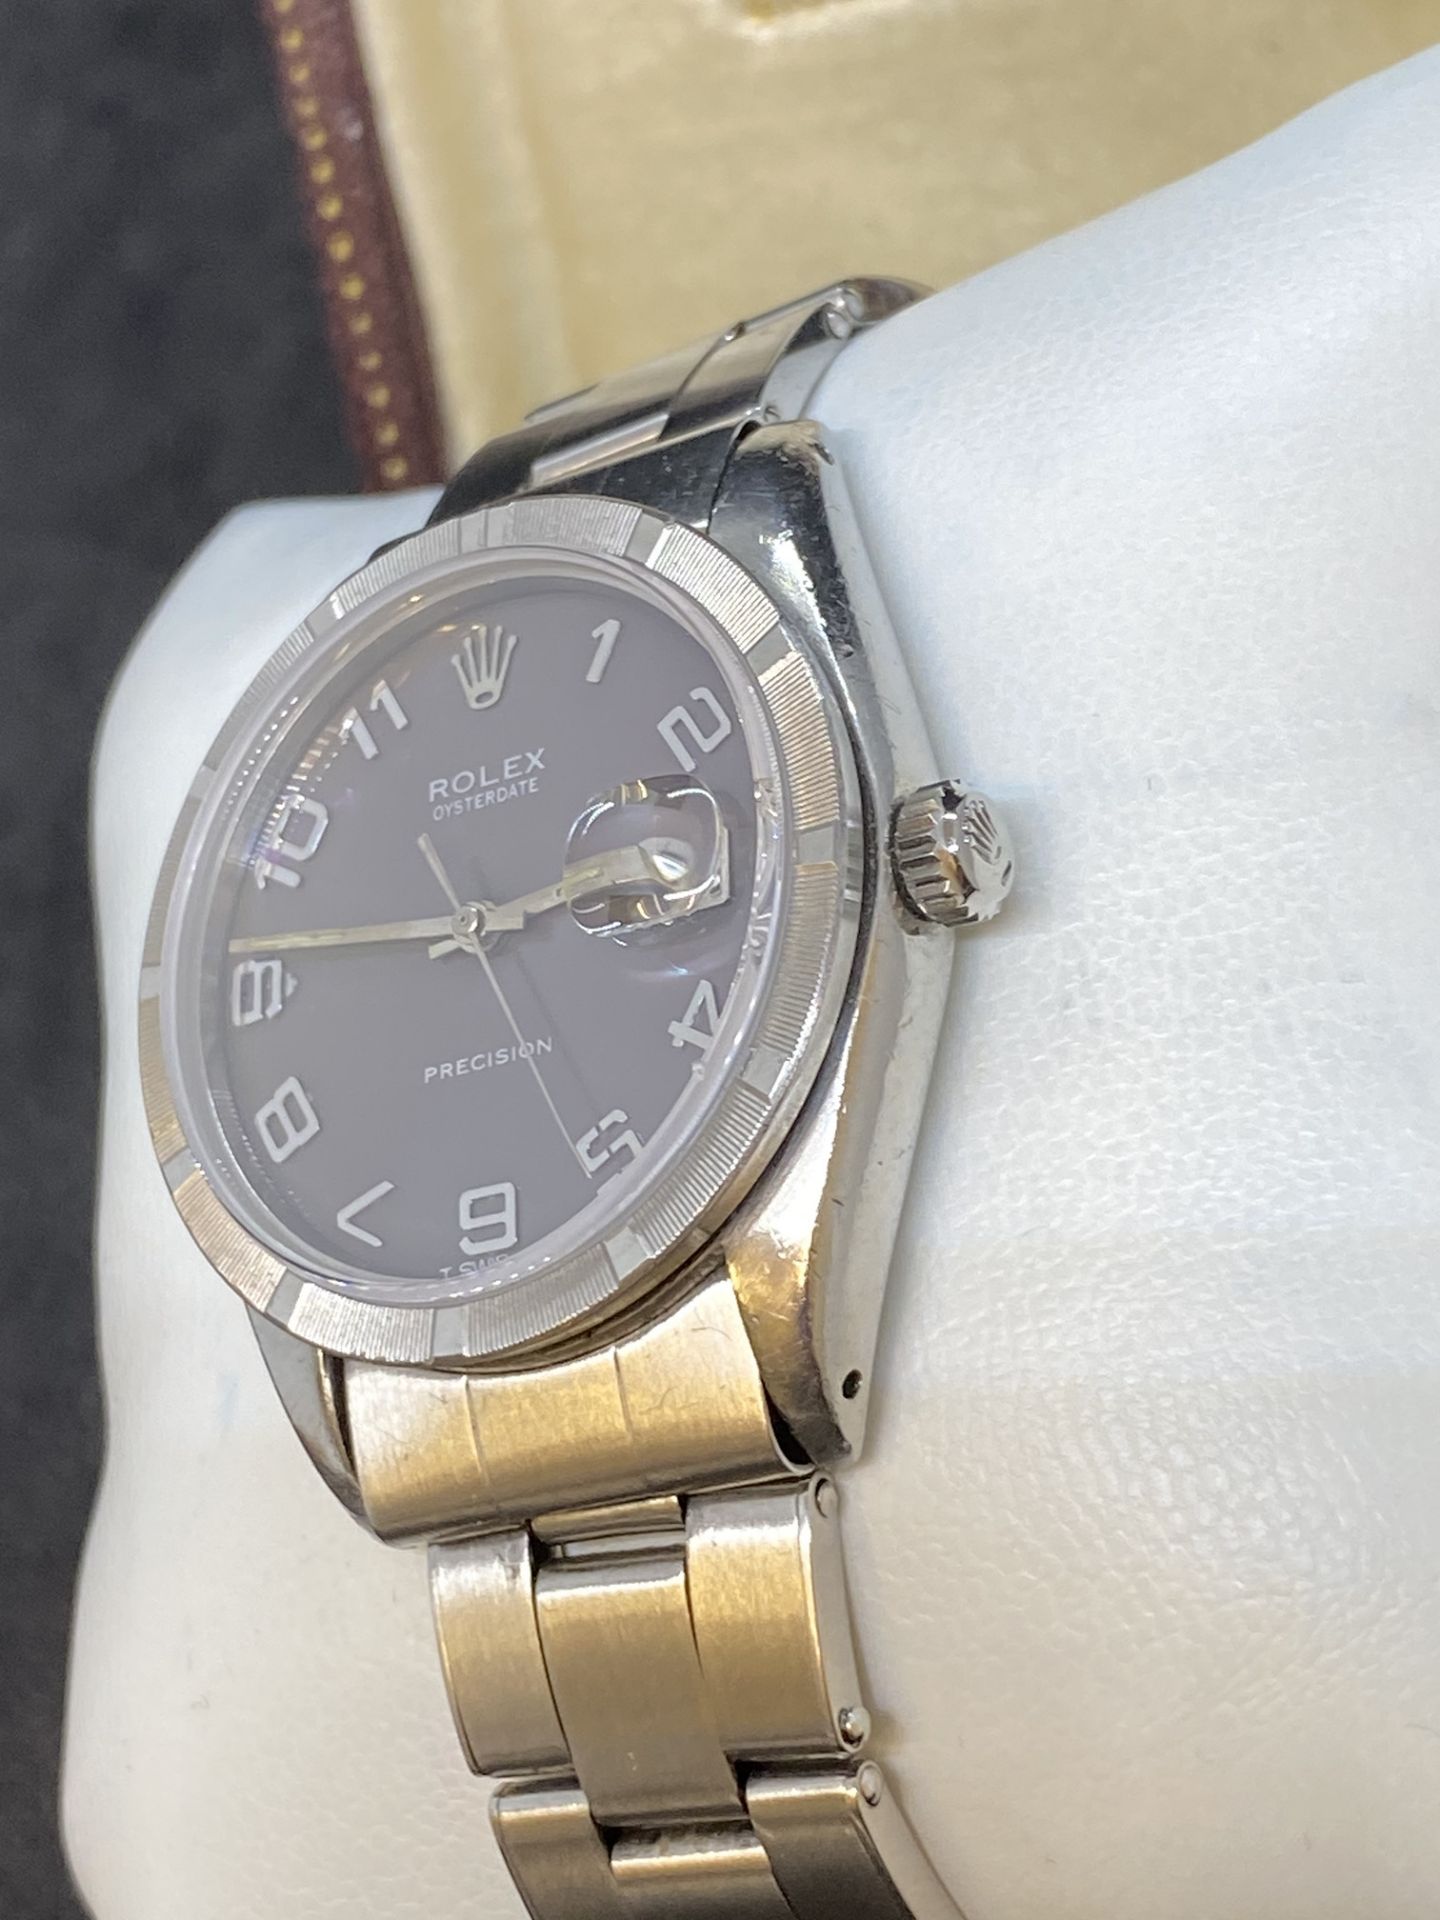 ROLEX OYSTERDATE PRECISION WATCH - Image 3 of 15